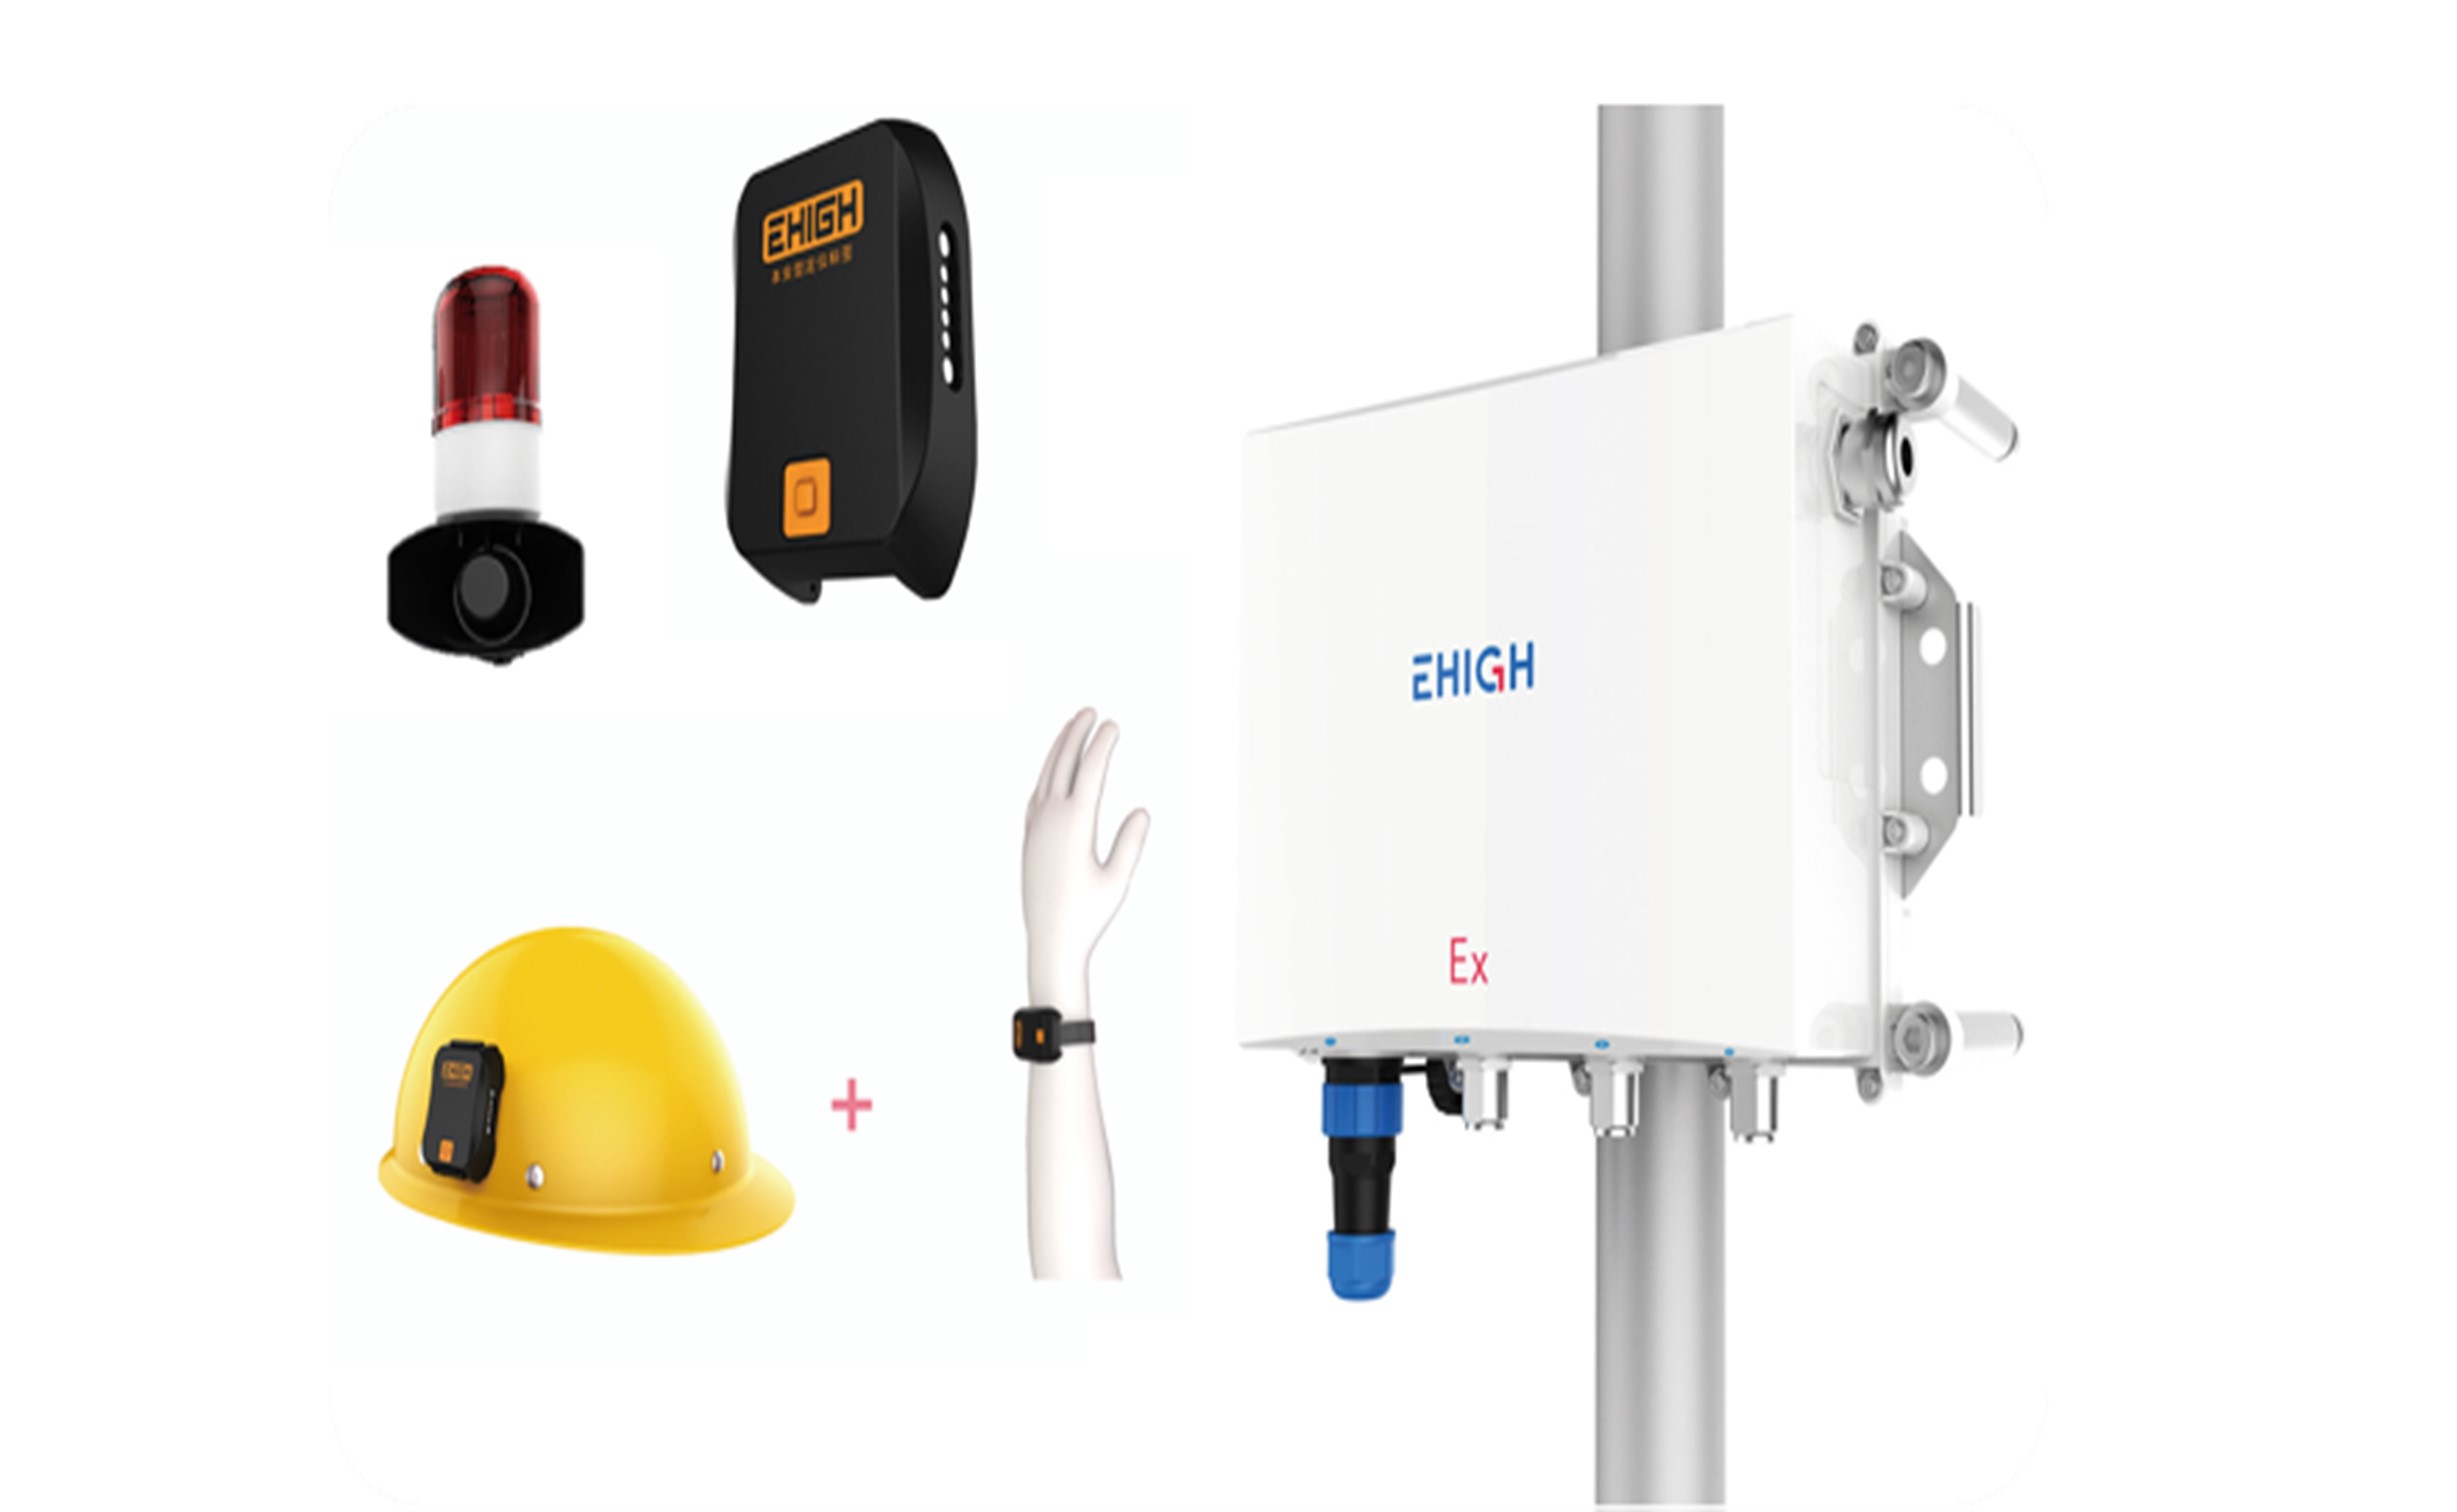 EverHigh Precise Positioning & Safety Management System